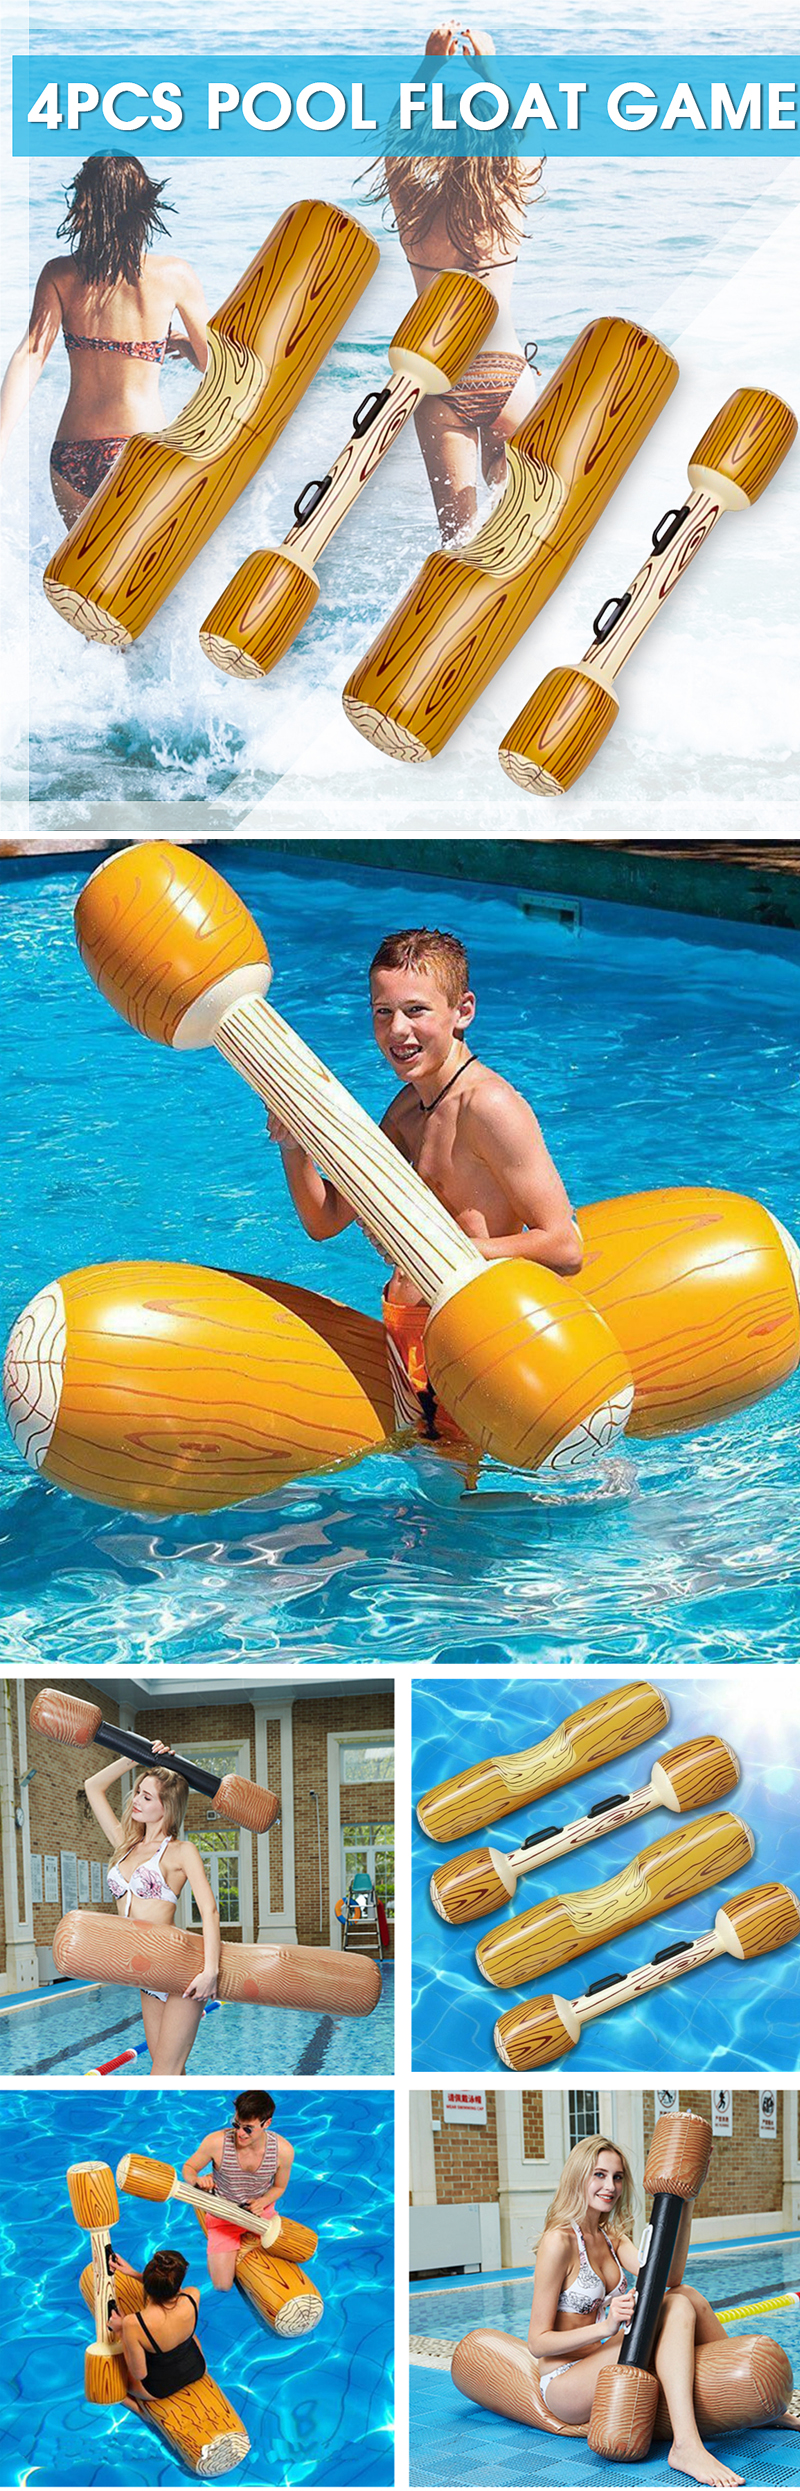 4-PcsSet-Swimming-Pool-Inflatable-Float-Water-Sports-Bumper-Play-Fun-Toy-1463508